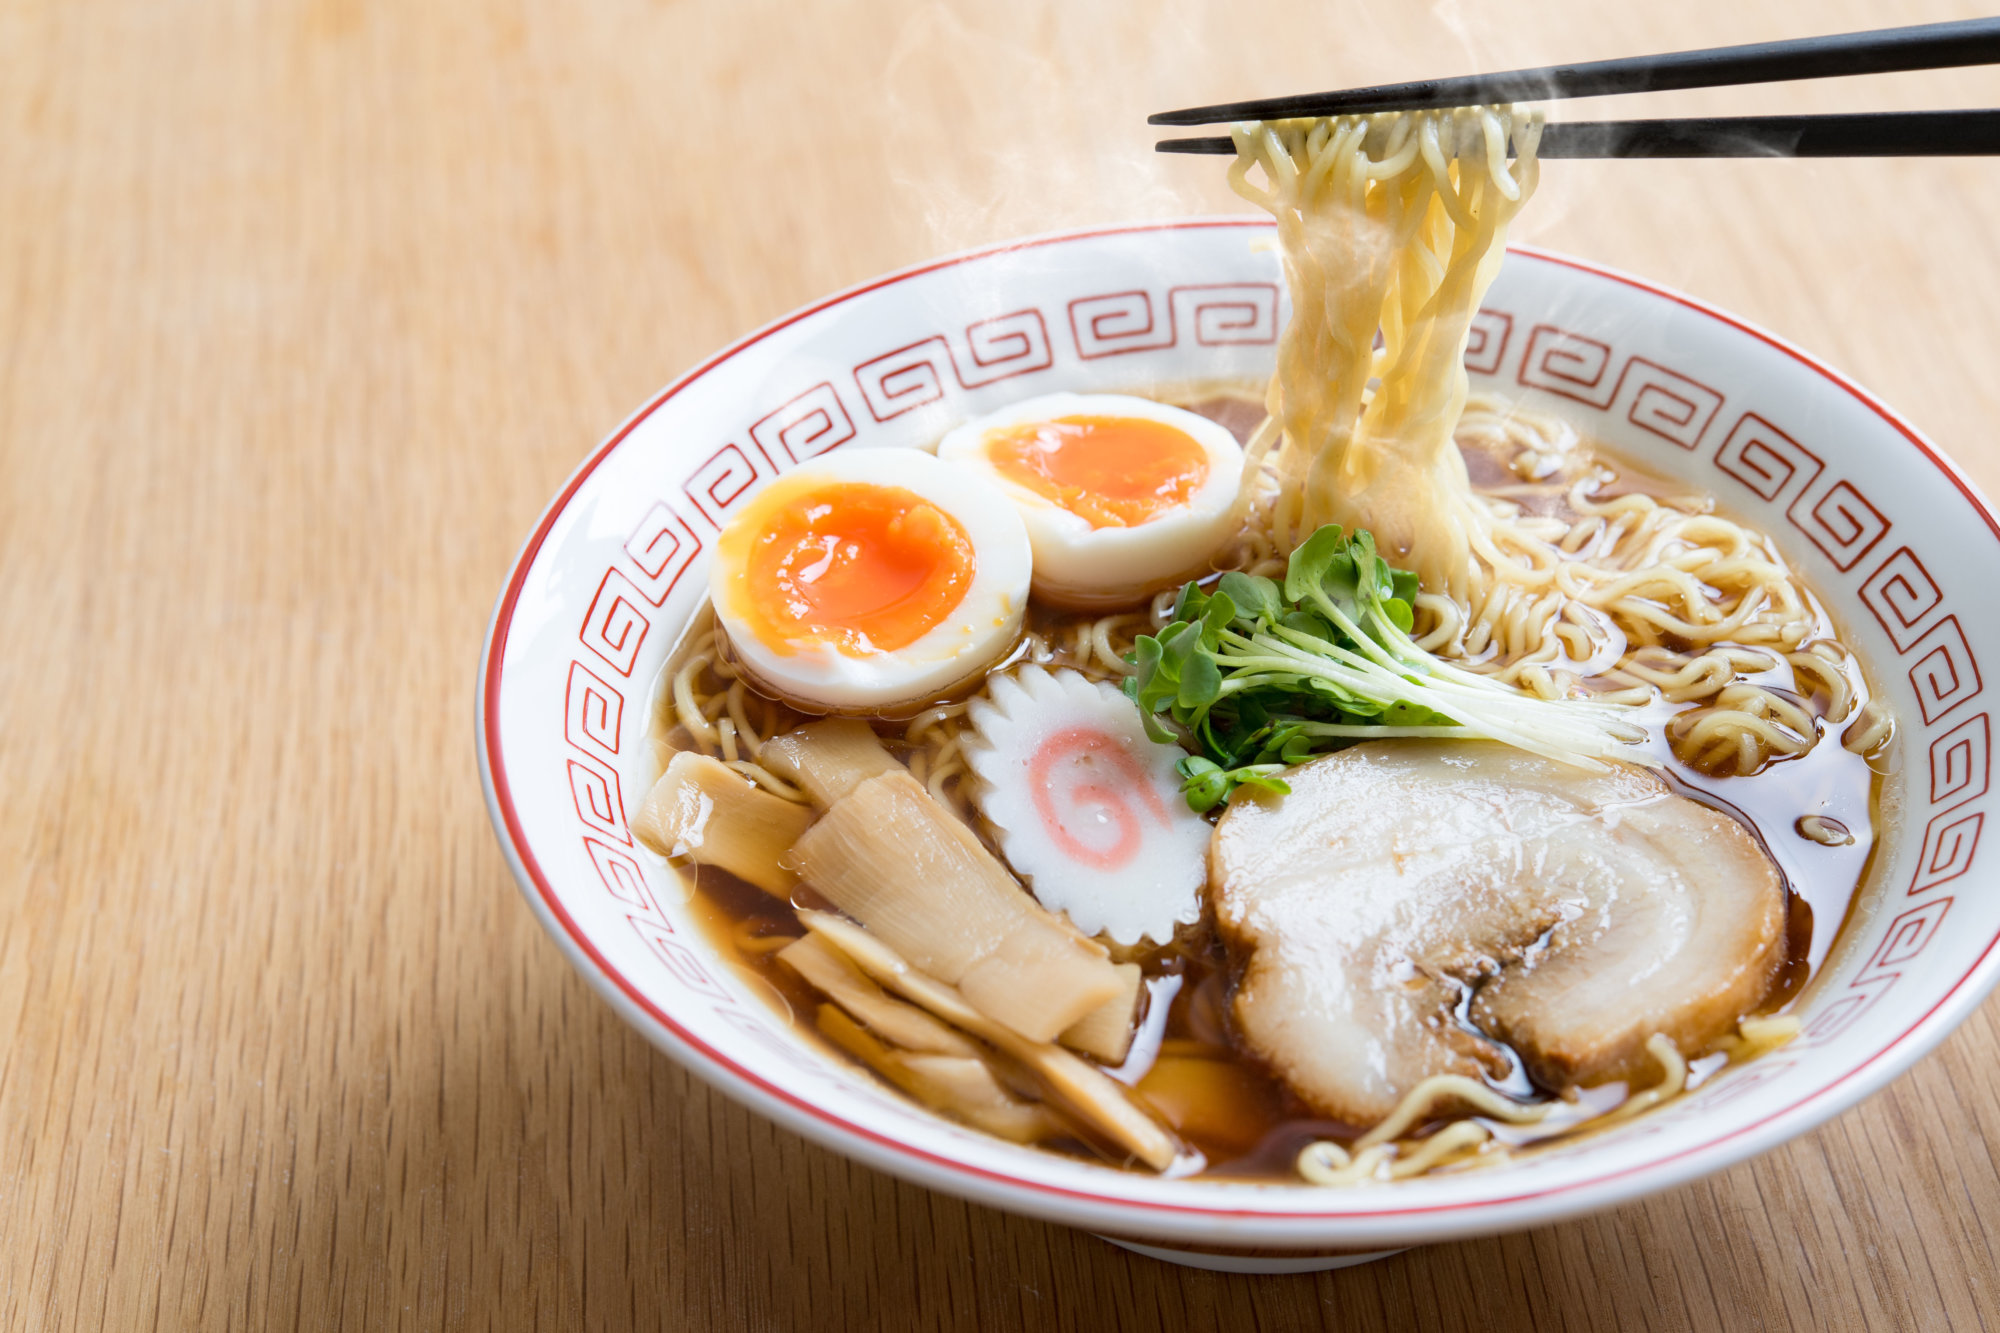 <h2><strong>Turkey ramen </strong></h2>
<p>Lots of people use leftover turkey to make soup. So why not make ramen?</p>
<p><a href="https://www.epicurious.com/recipes/food/views/turkey-ramen-51197040" target="_blank" rel="noopener">Find the recipe for turkey ramen on Epicurious</a>.</p>
<p>&nbsp;</p>
